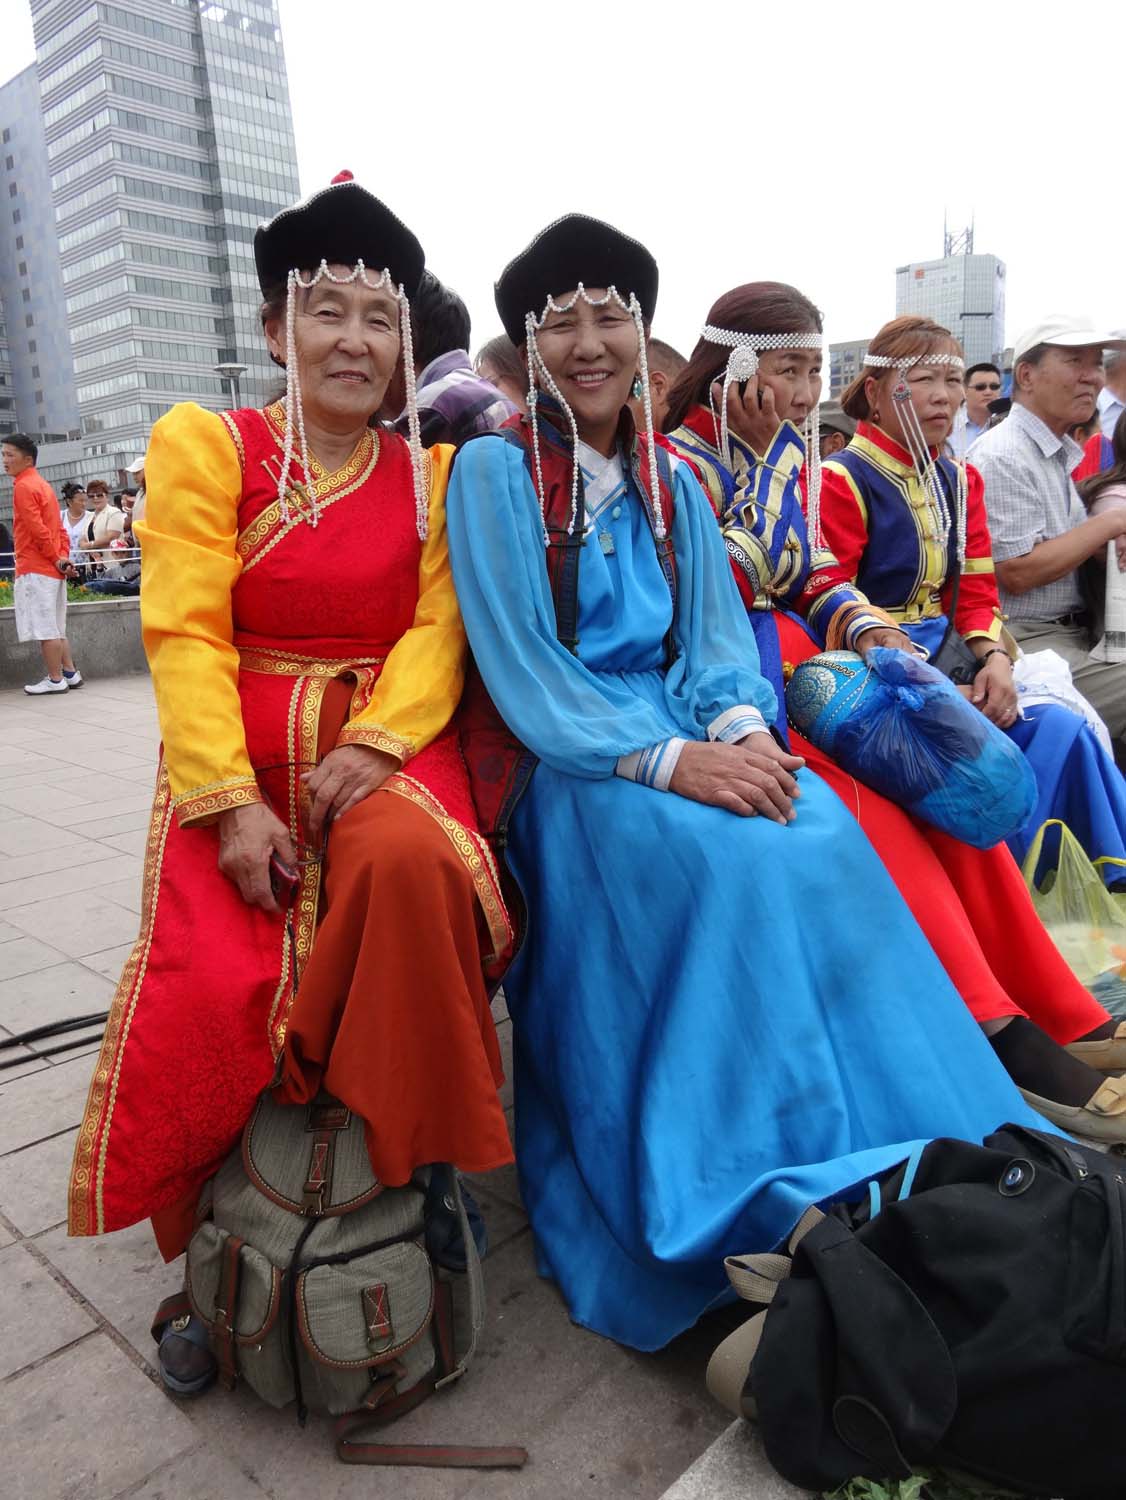 ladies wearing traditional dress in the main square of UB